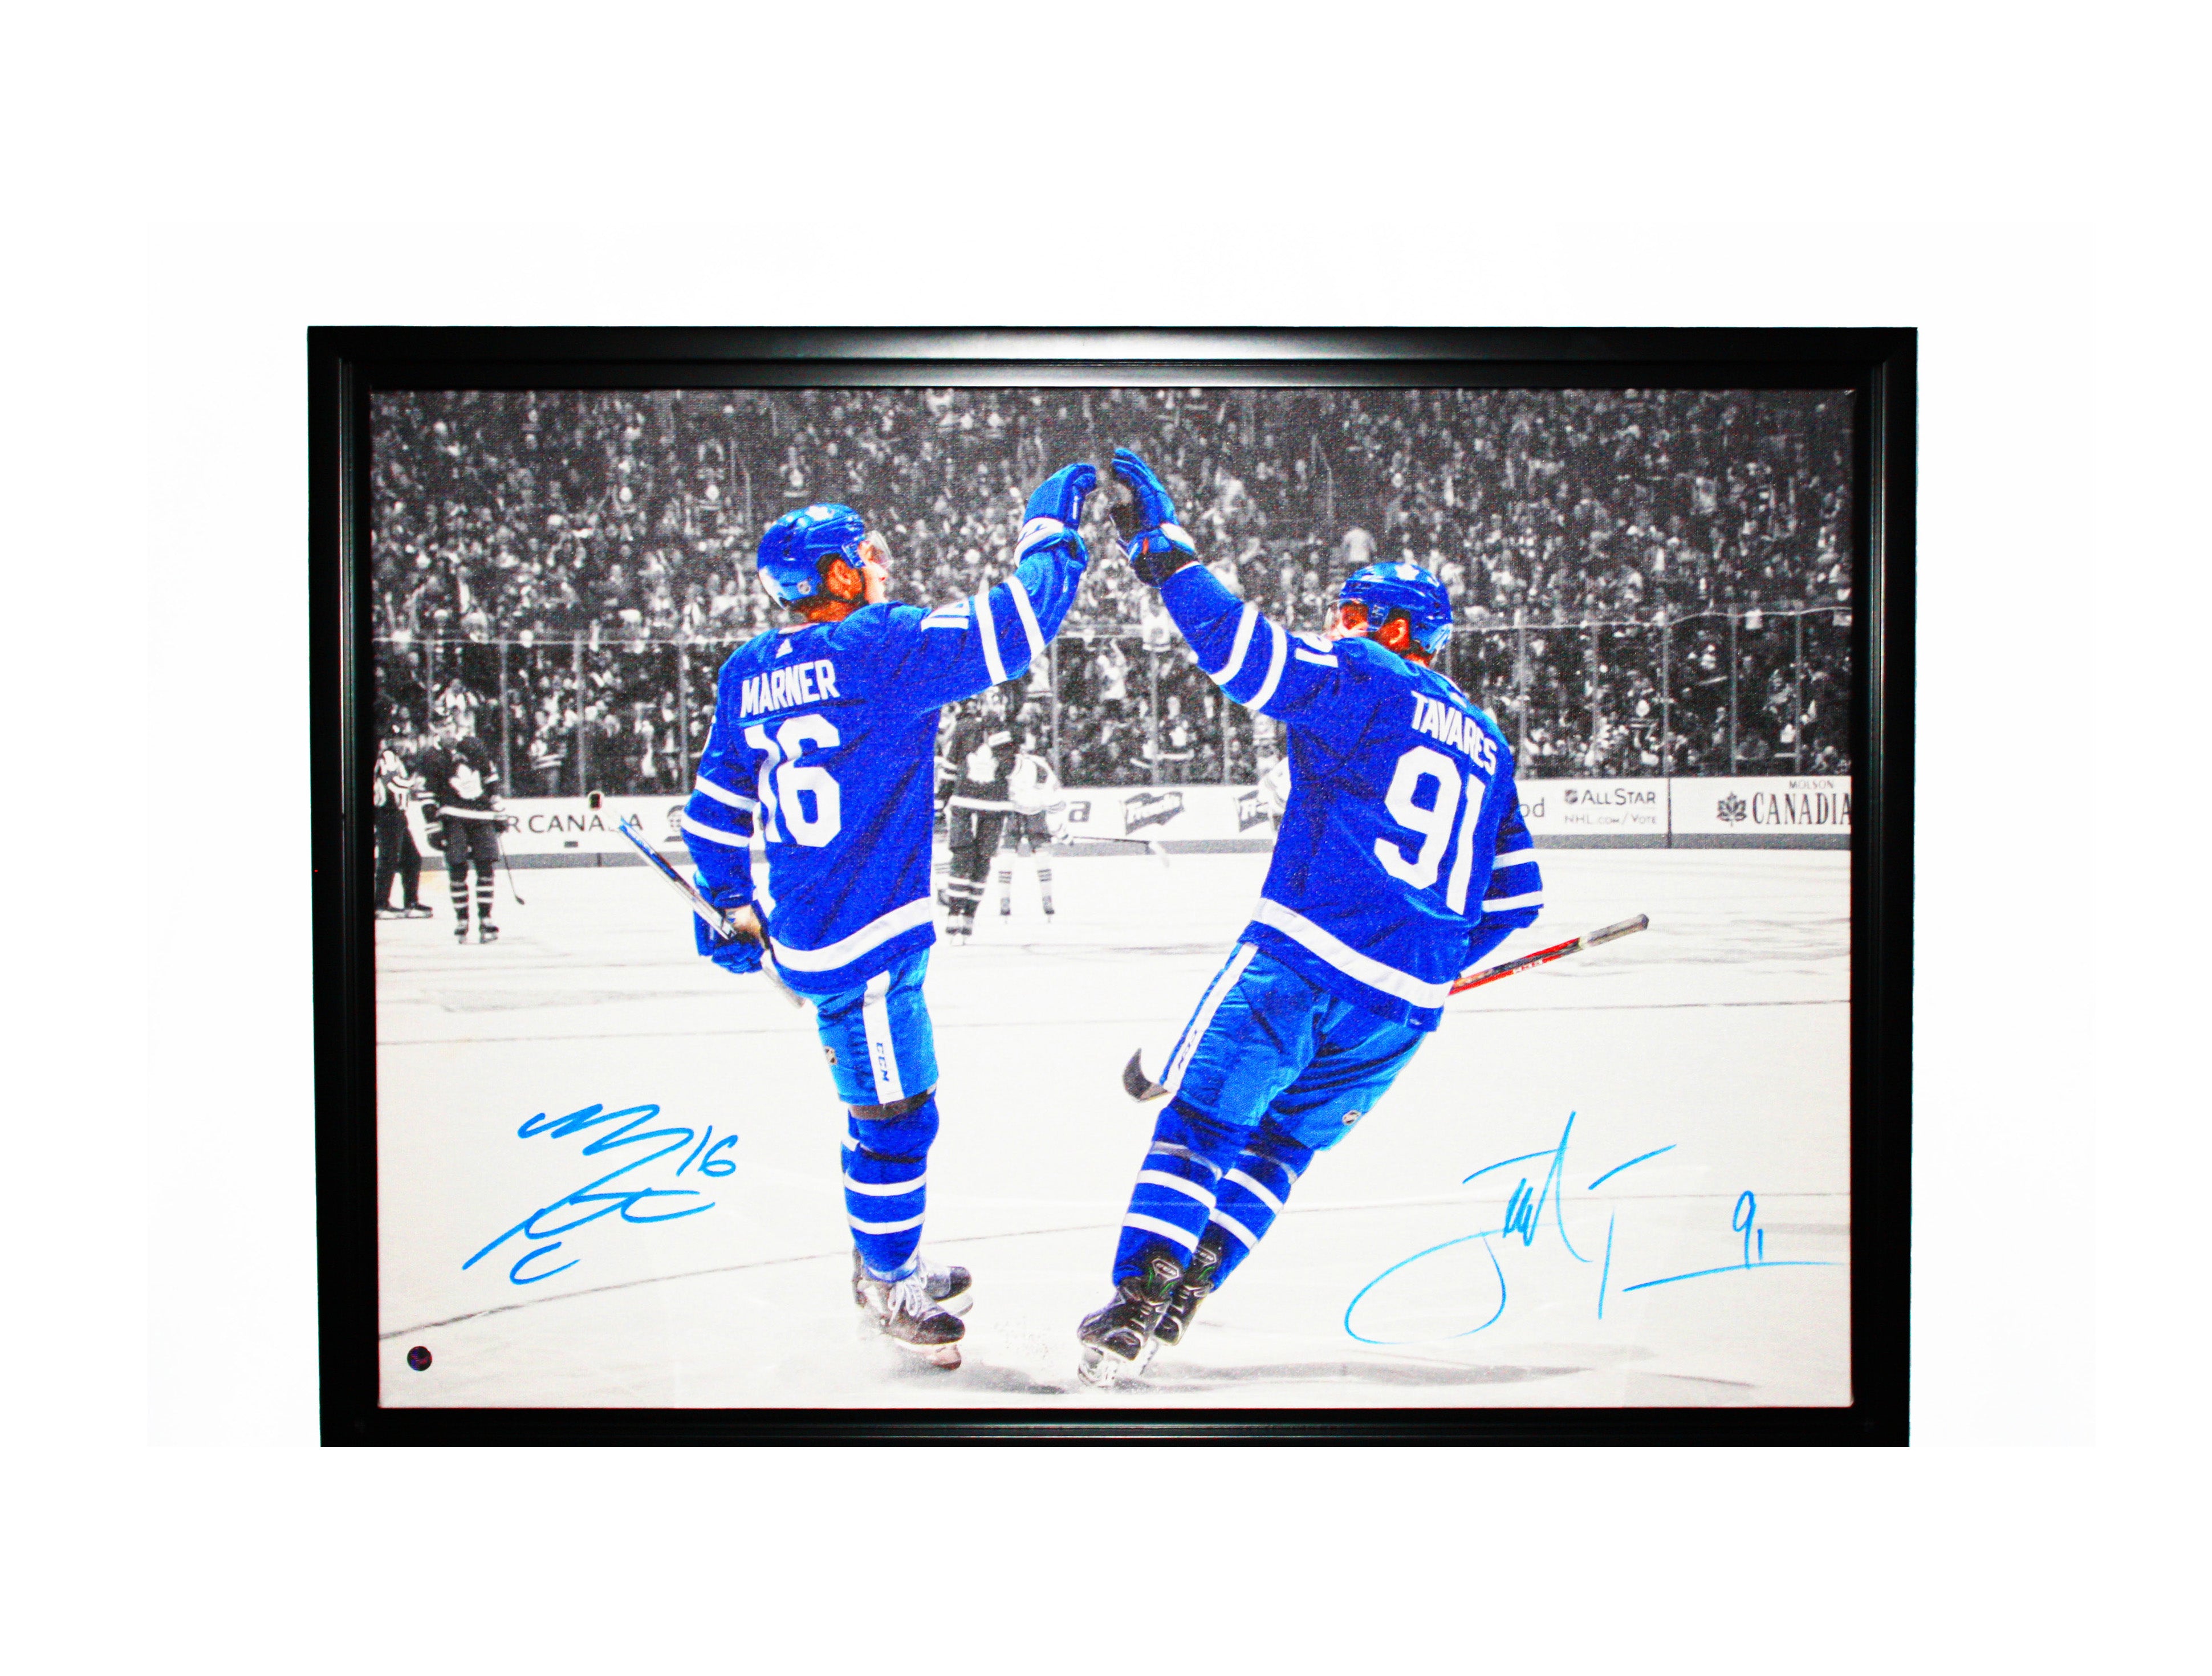 Morgan Rielly signed framed picture packaged deal with John Tavares Mitch Marner signed picture